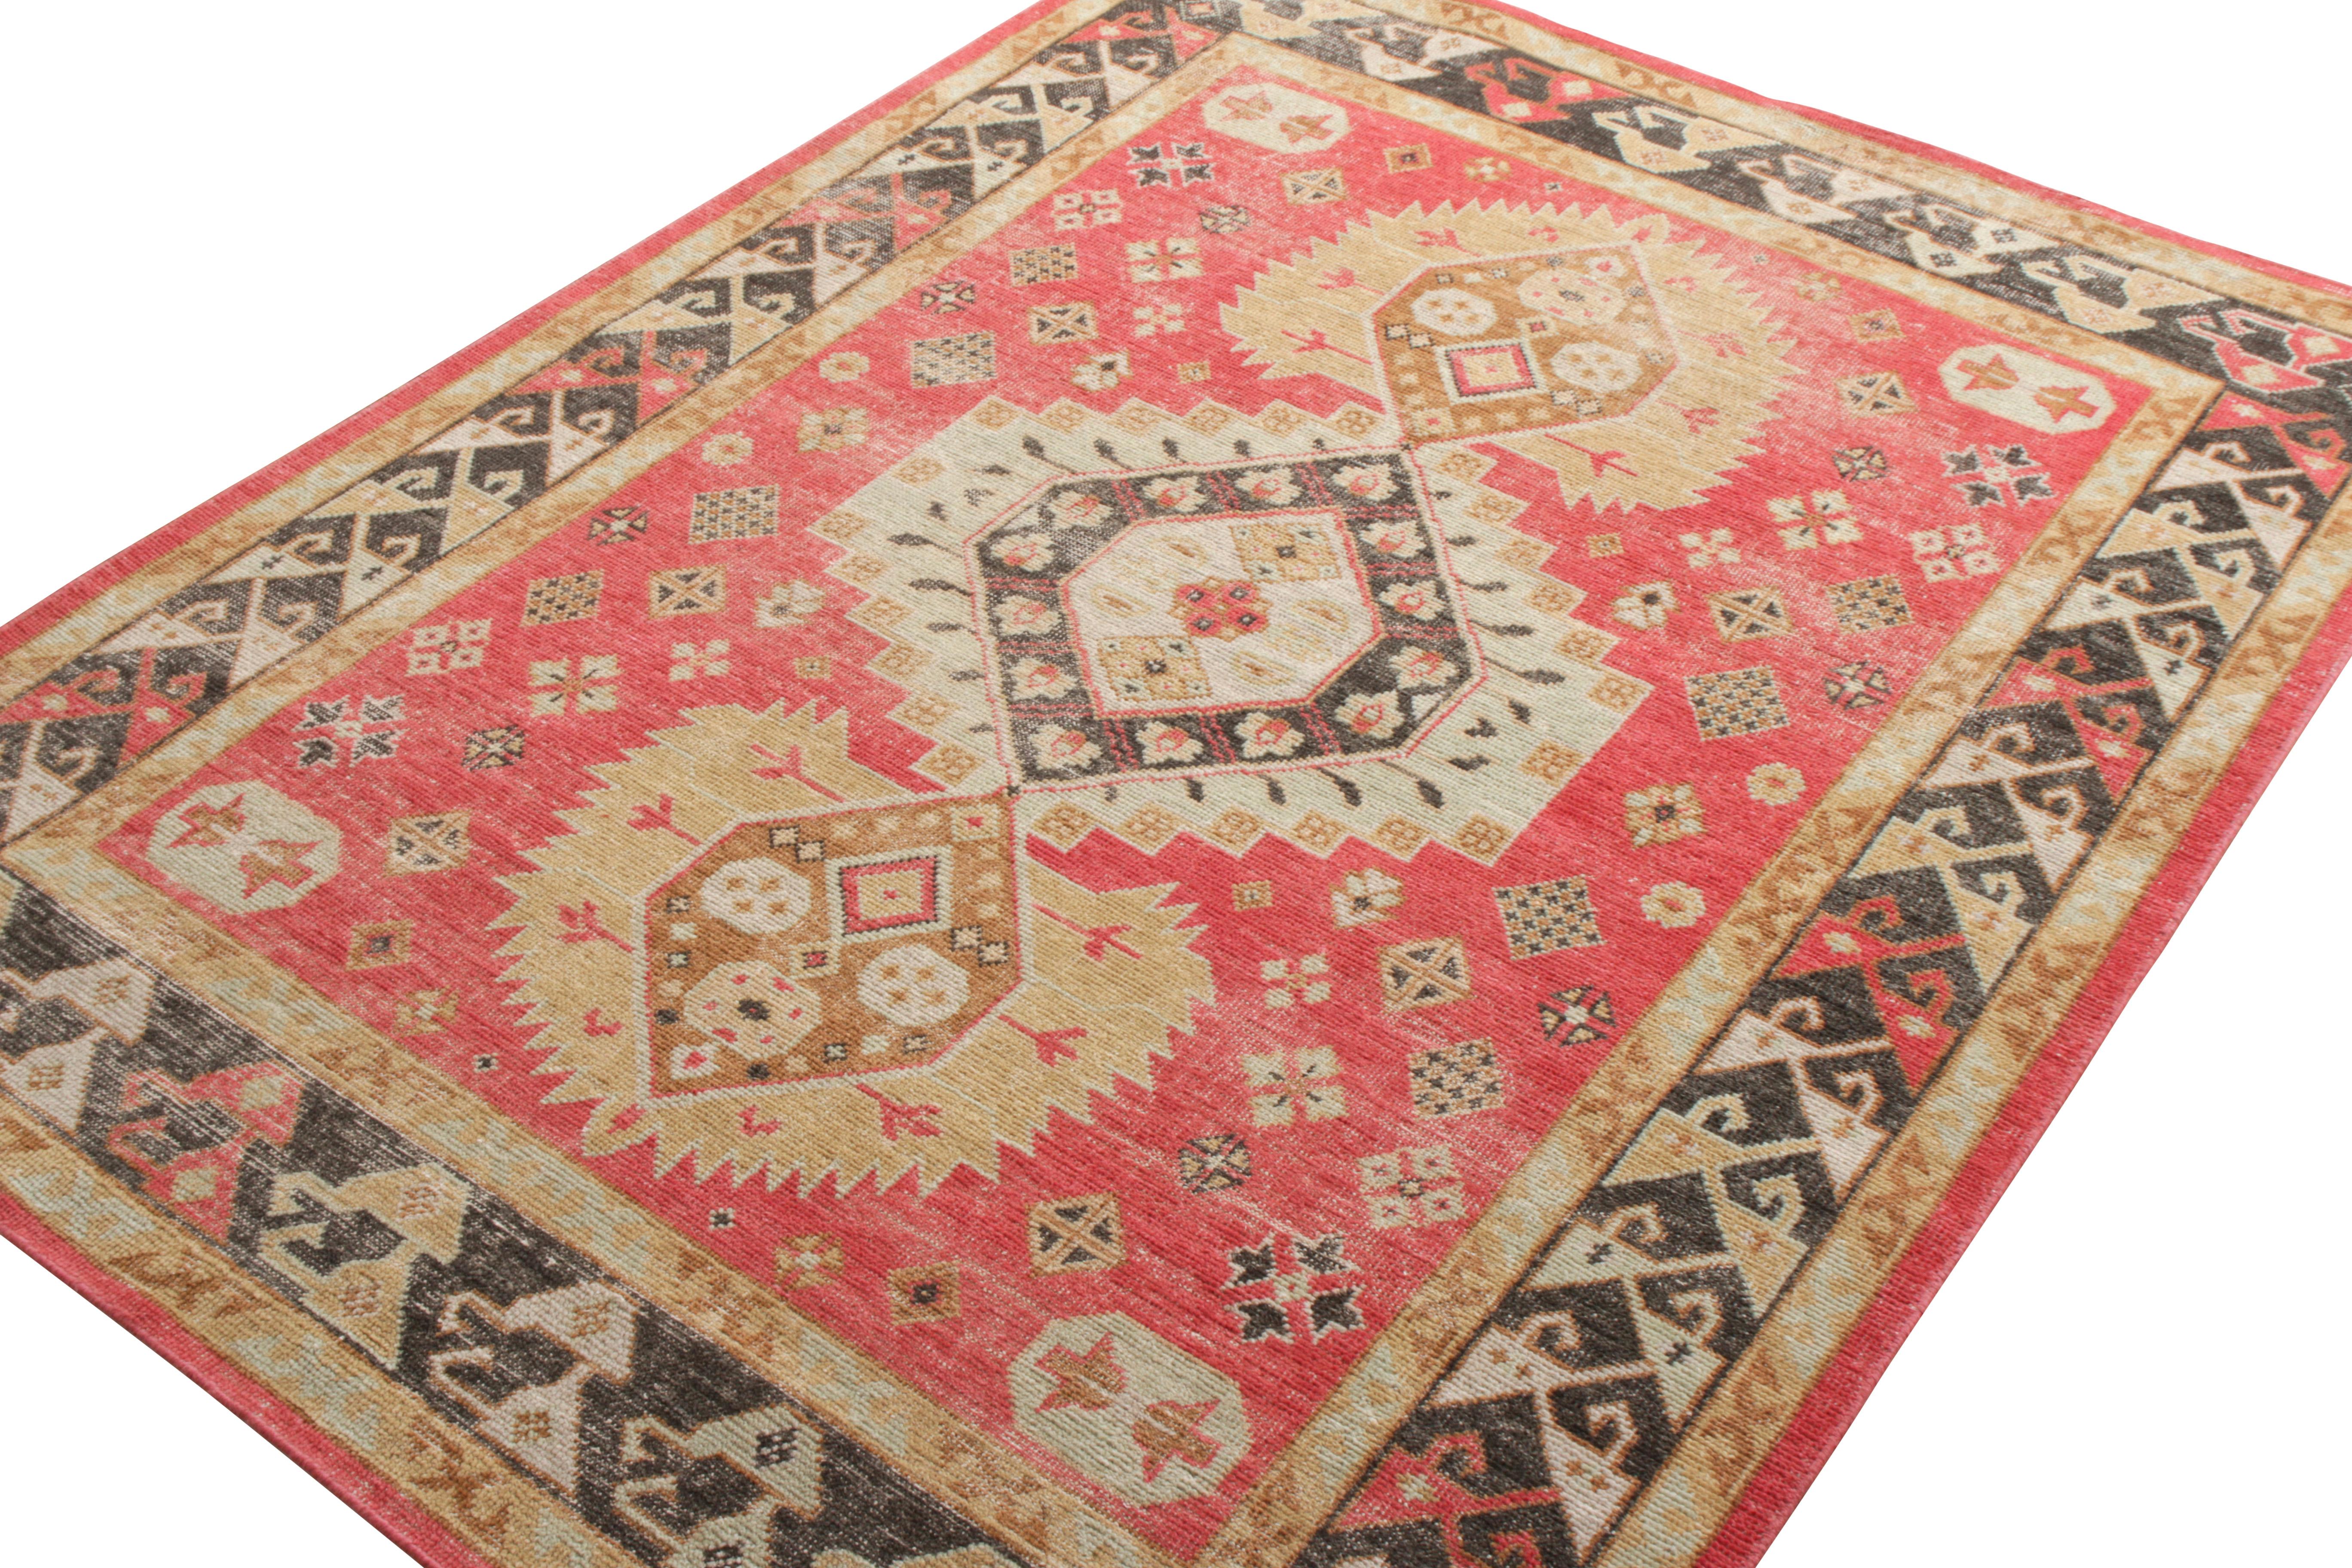 Tribal Rug & Kilim’s Distressed Classic Style Rug in Red, Beige-Brown Medallion Pattern For Sale